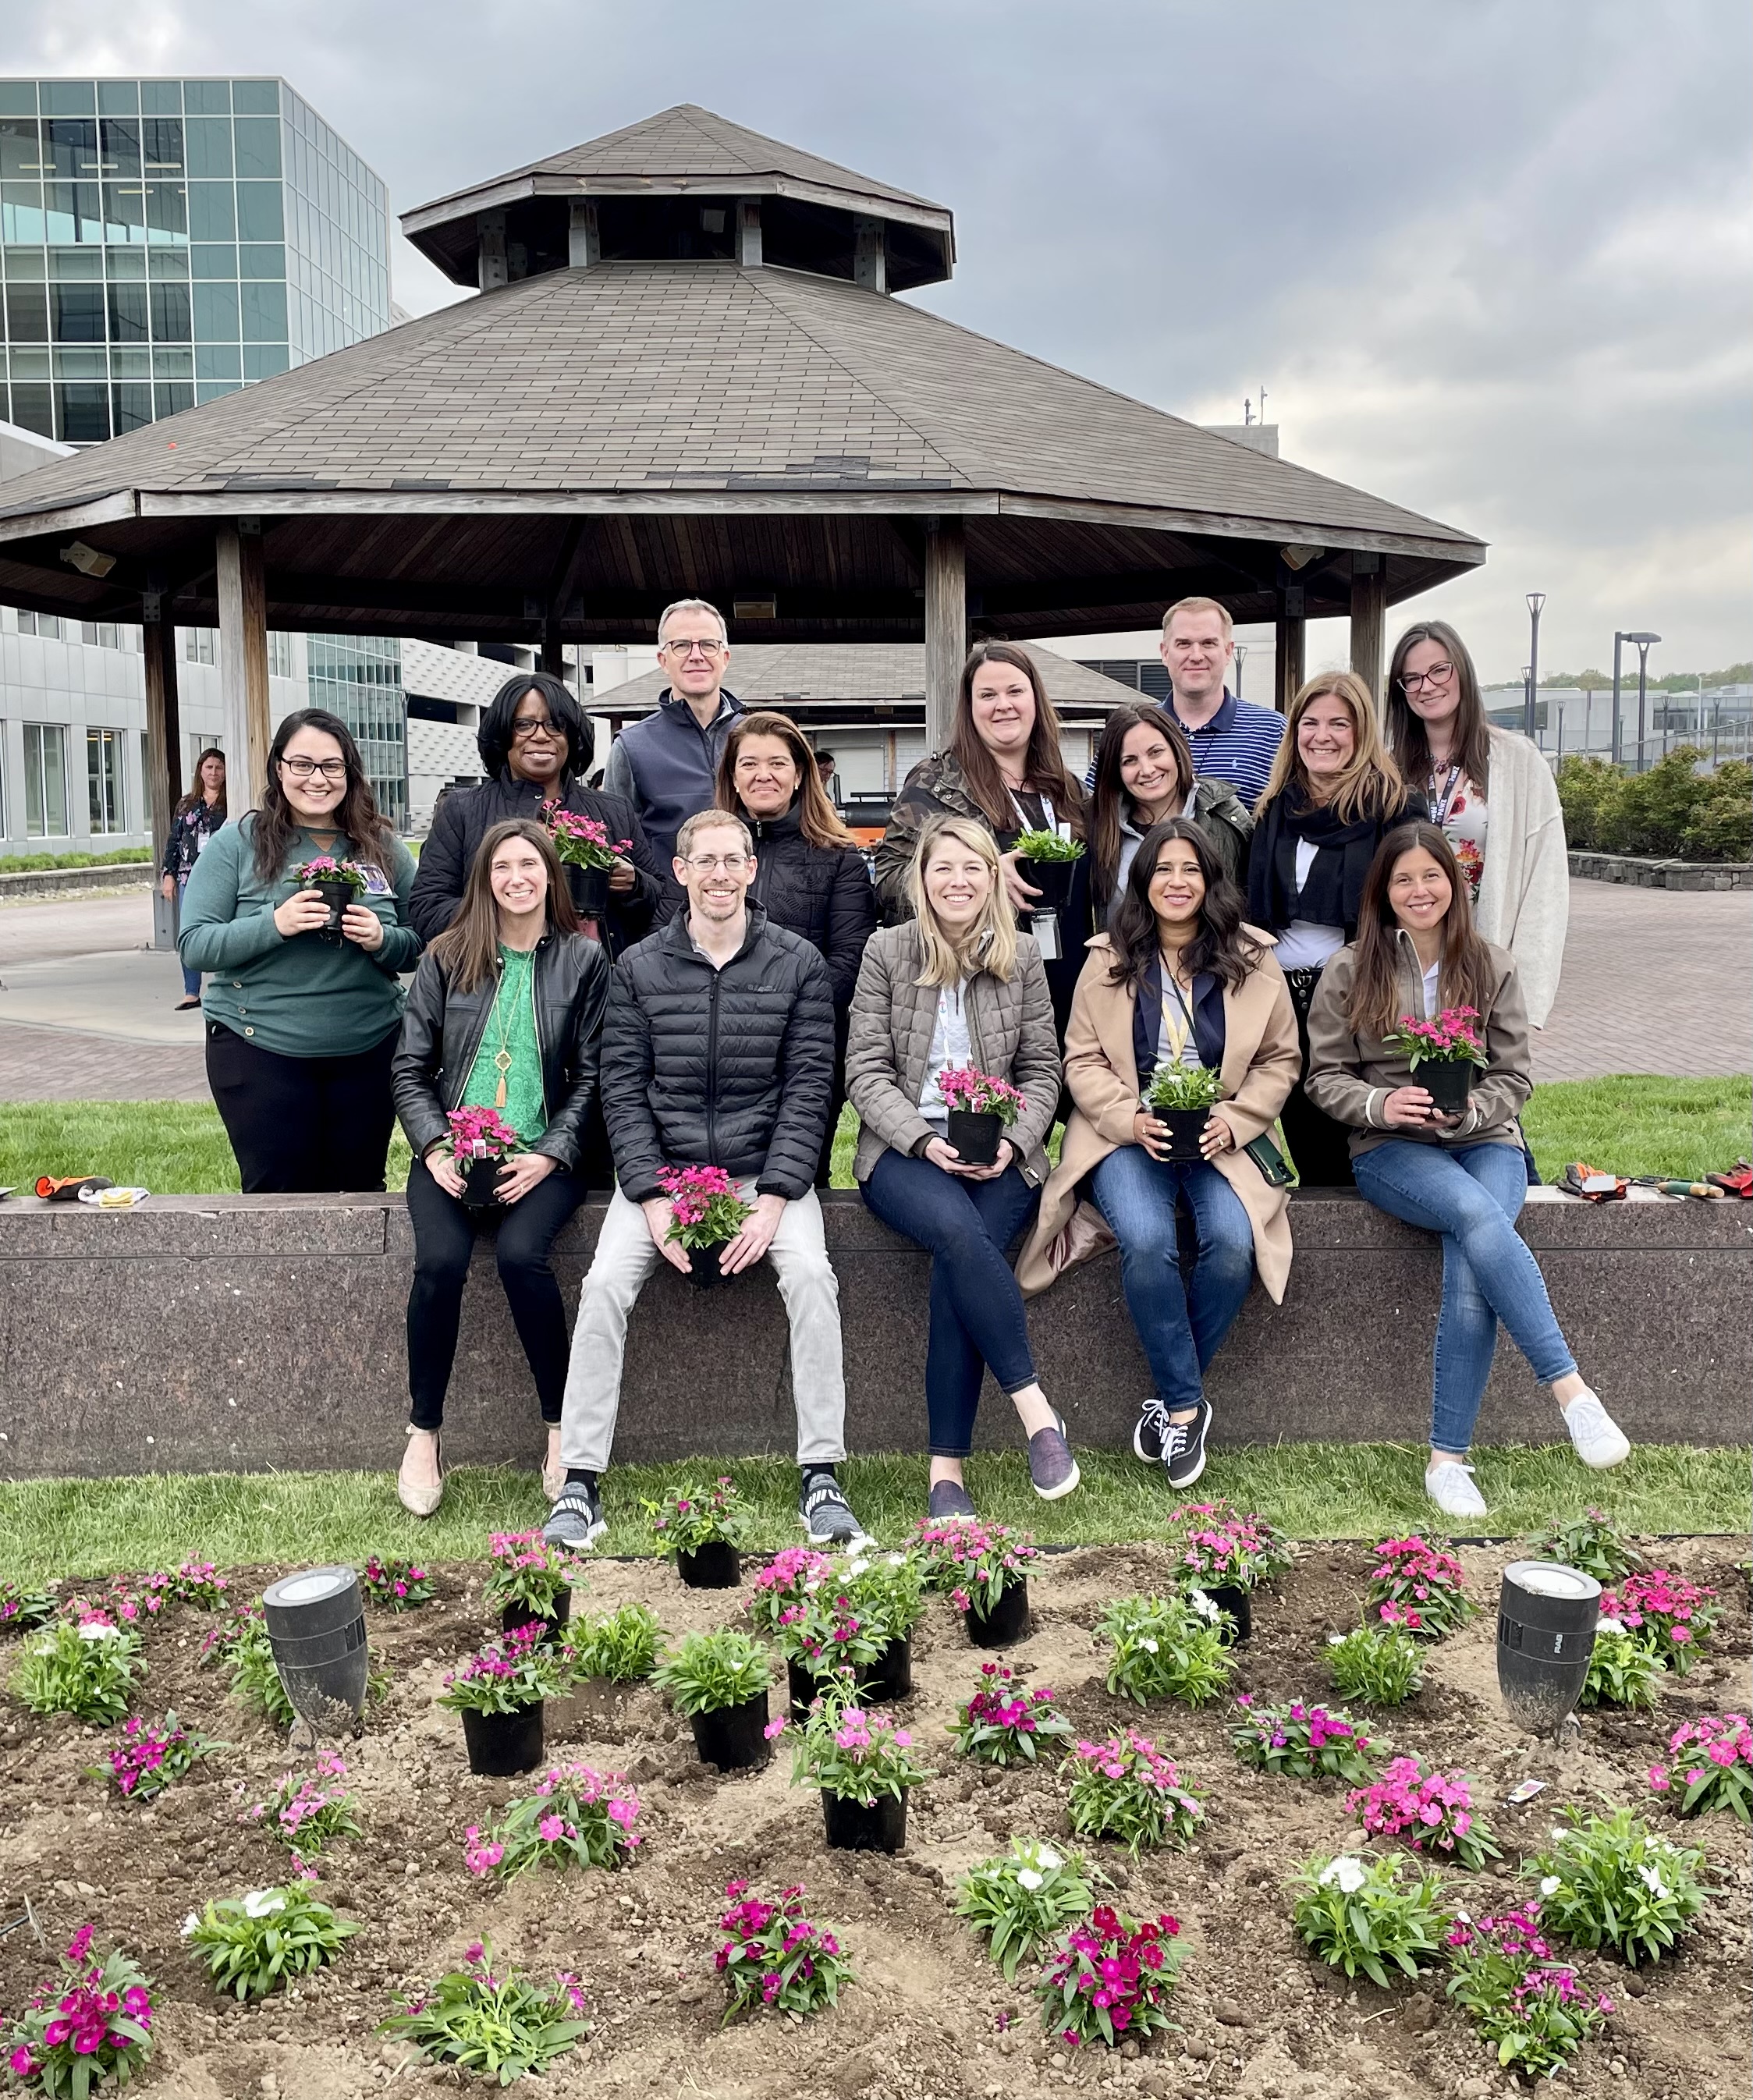 A diverse group of employees holding pots of pink flowers in front of a garden 